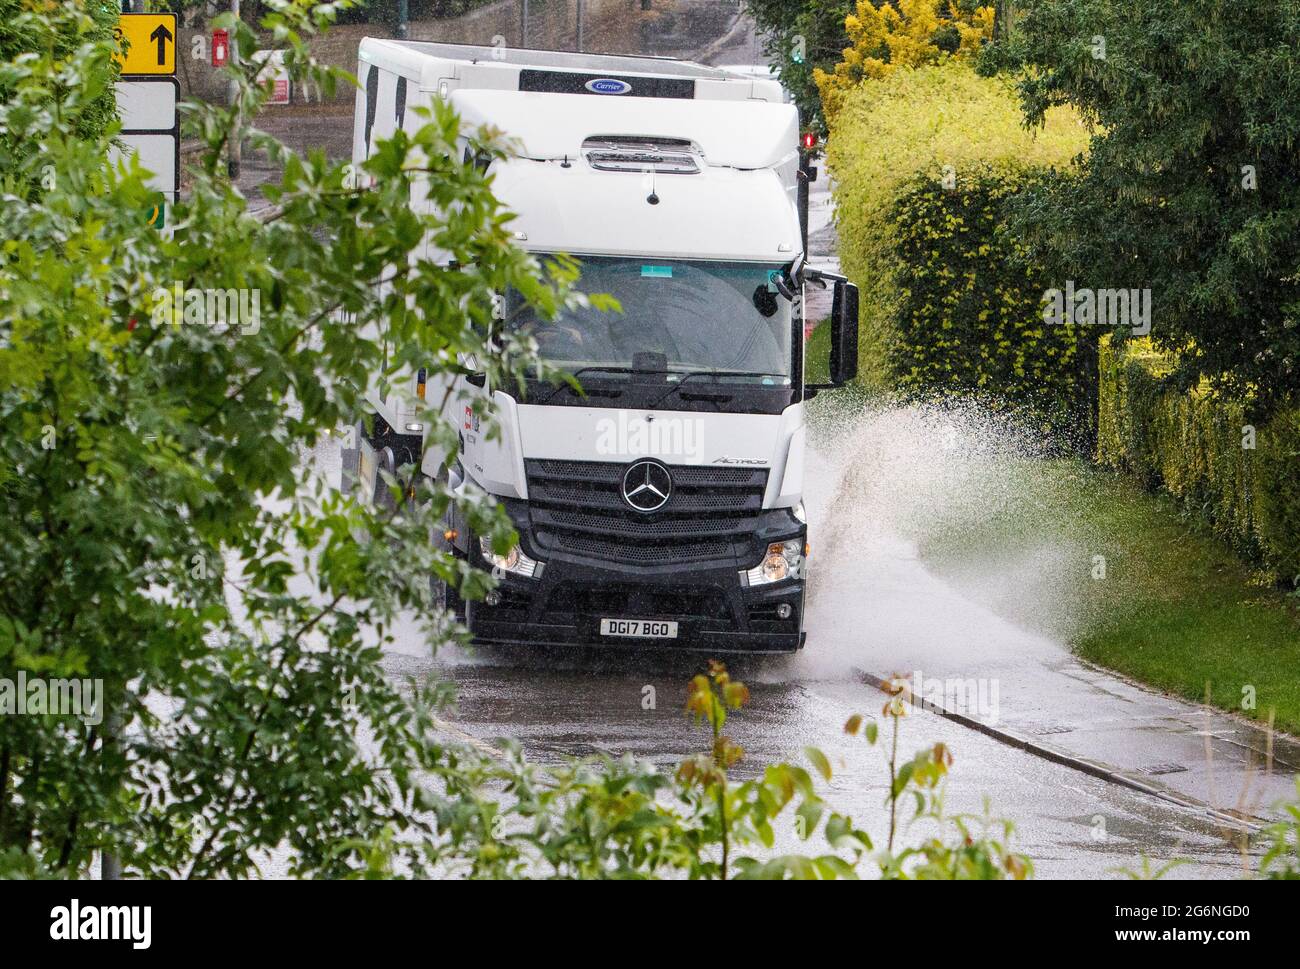 Chippenham, Wiltshire, UK. 7th July, 2021. Drivers are pictured braving torrential rain in Chippenham this evening as heavy rain showers once again make their way across Southern England. Credit: Lynchpics/Alamy Live News Stock Photo